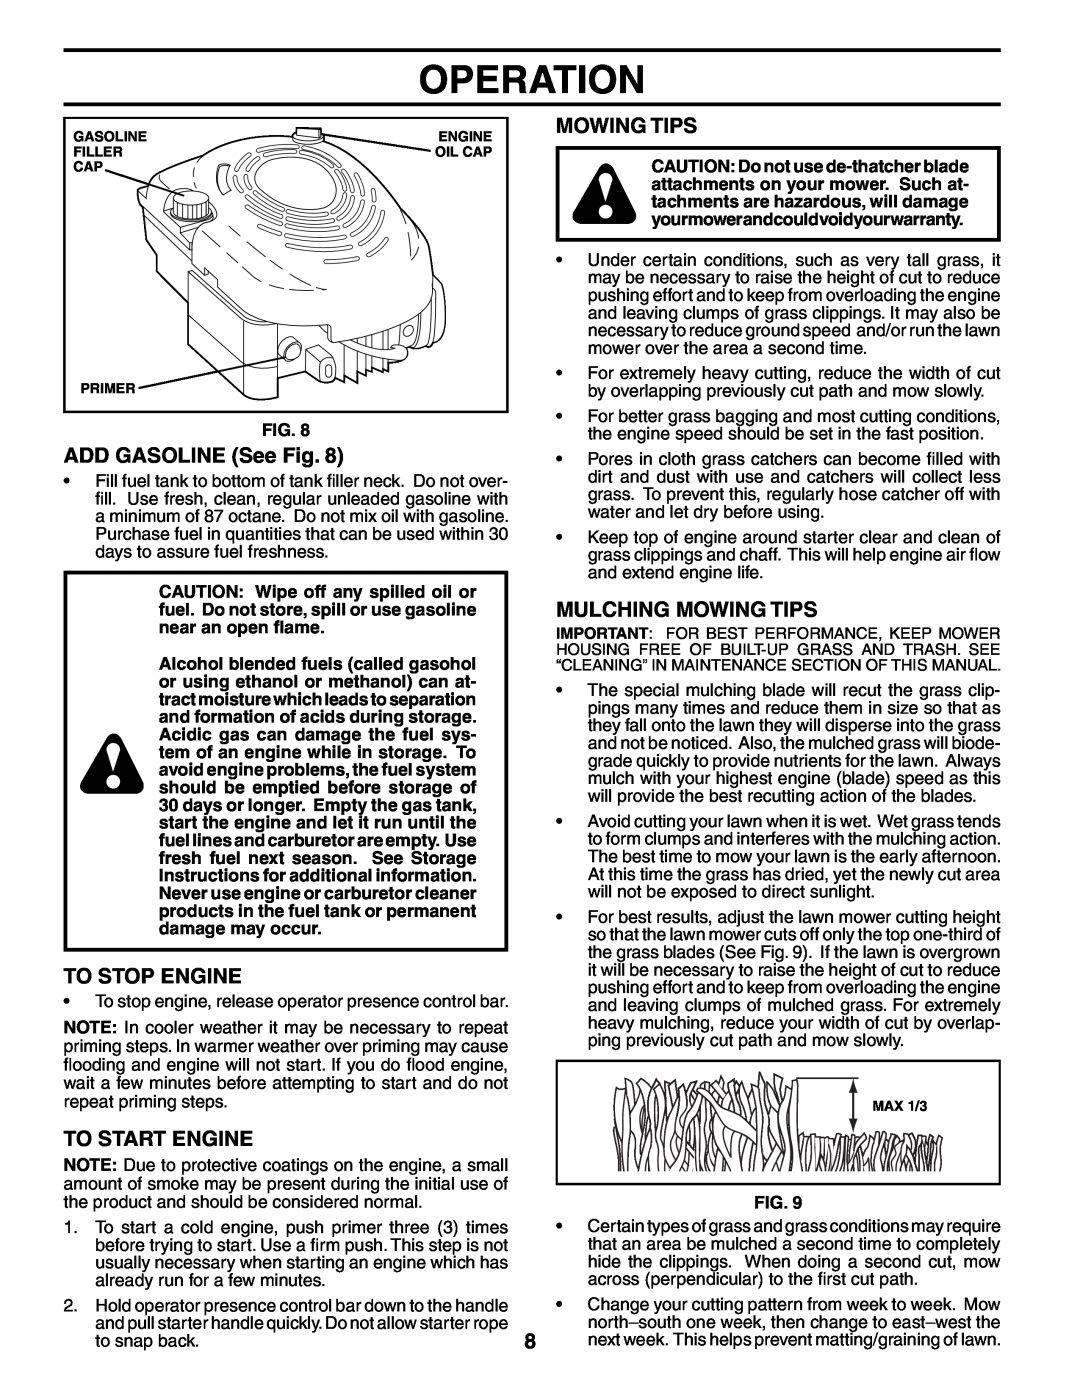 Husqvarna 917.37535 owner manual ADD GASOLINE See Fig, To Stop Engine, To Start Engine, Mulching Mowing Tips, Operation 